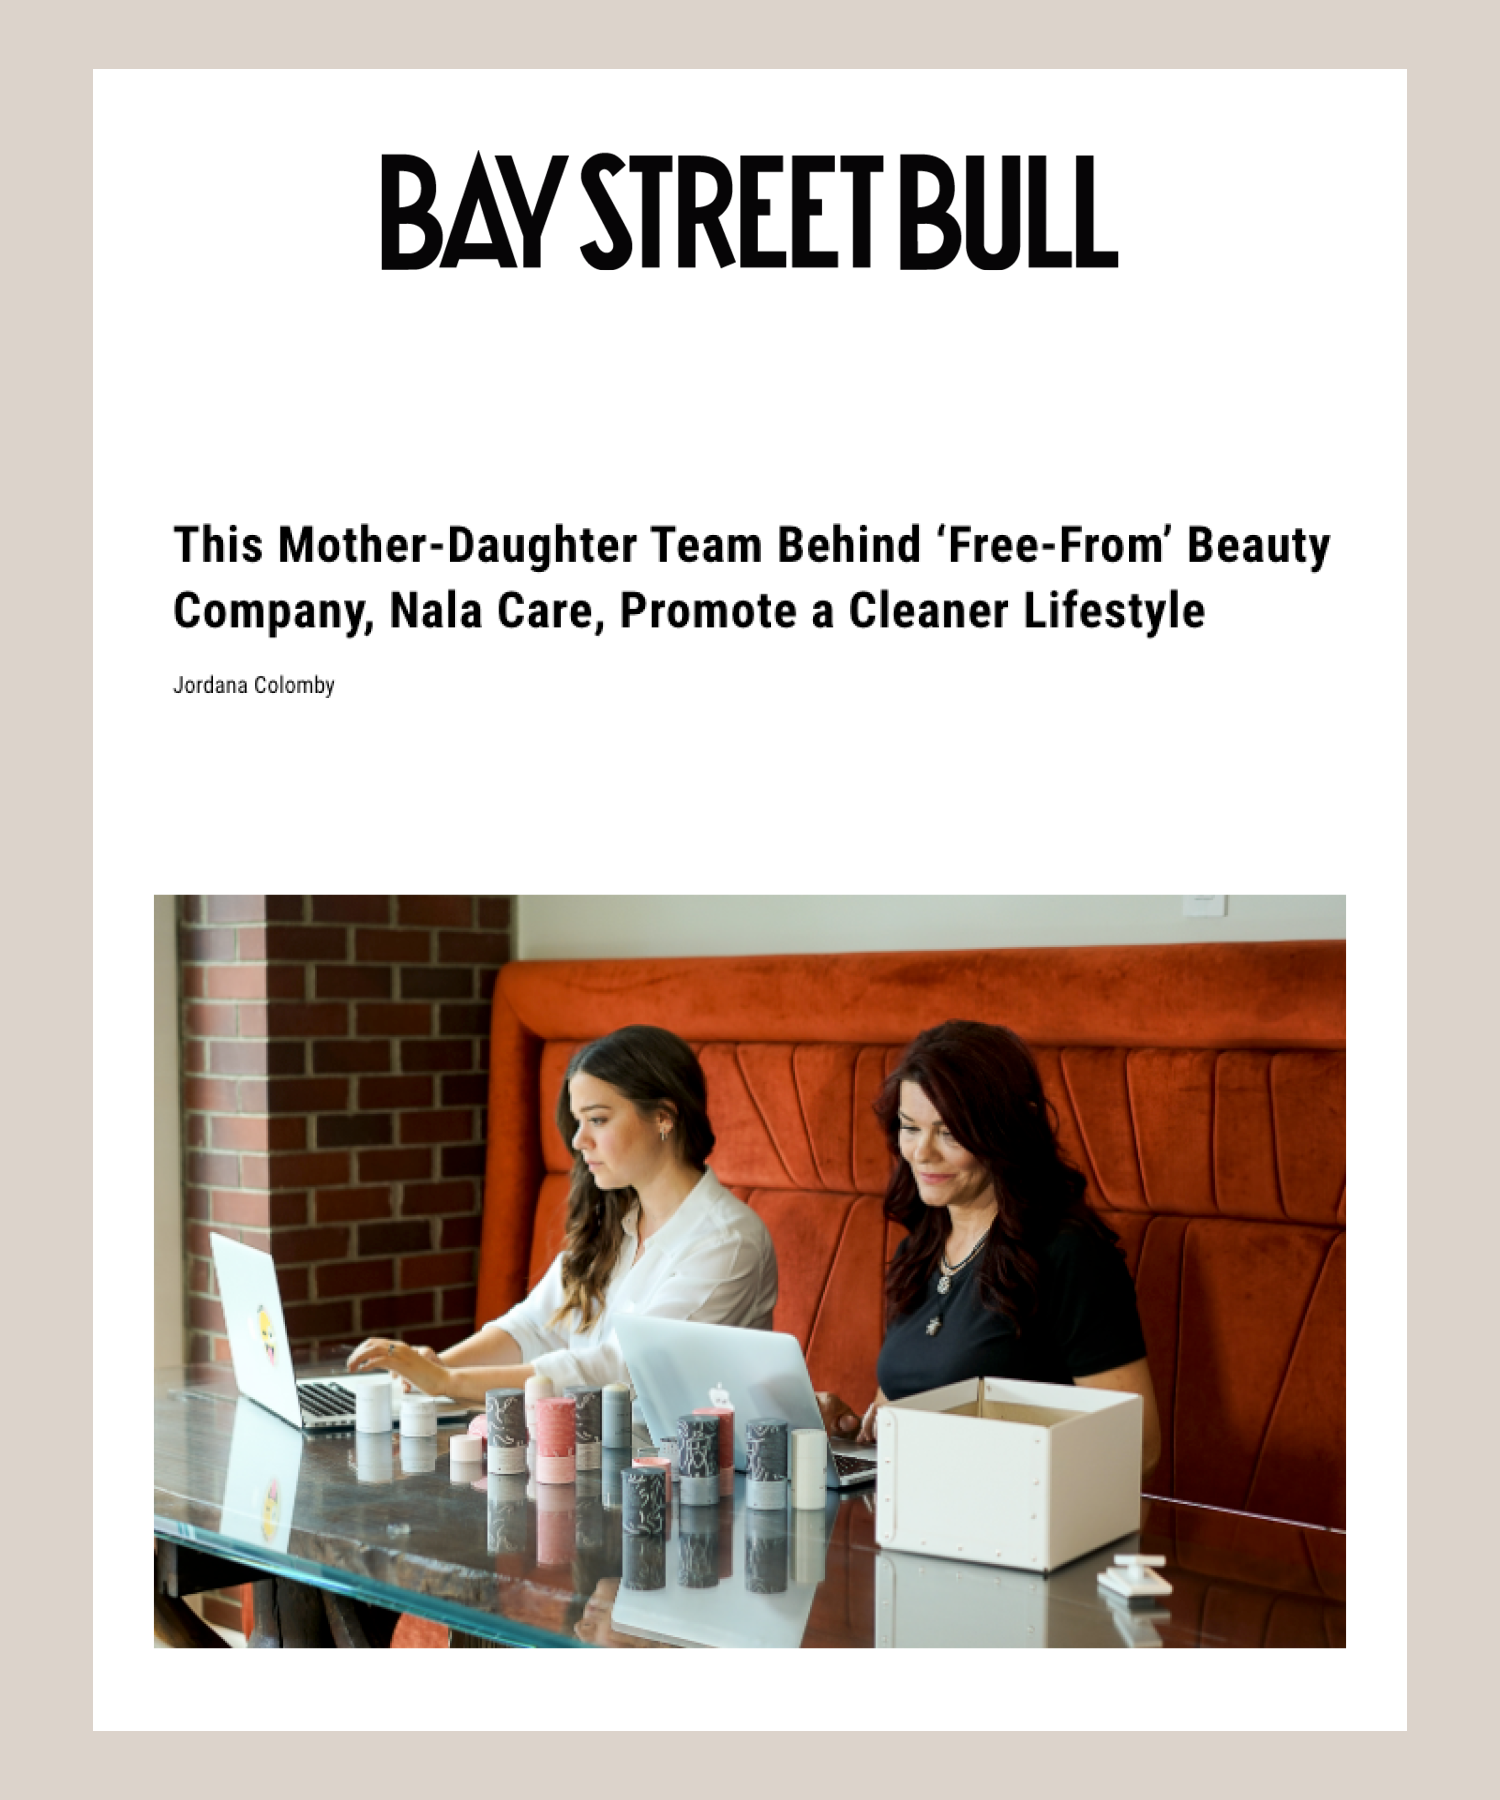 This Mother-Daughter Team Behind ‘Free-From’ Beauty Company, Nala Care, Promote a Cleaner Lifestyle